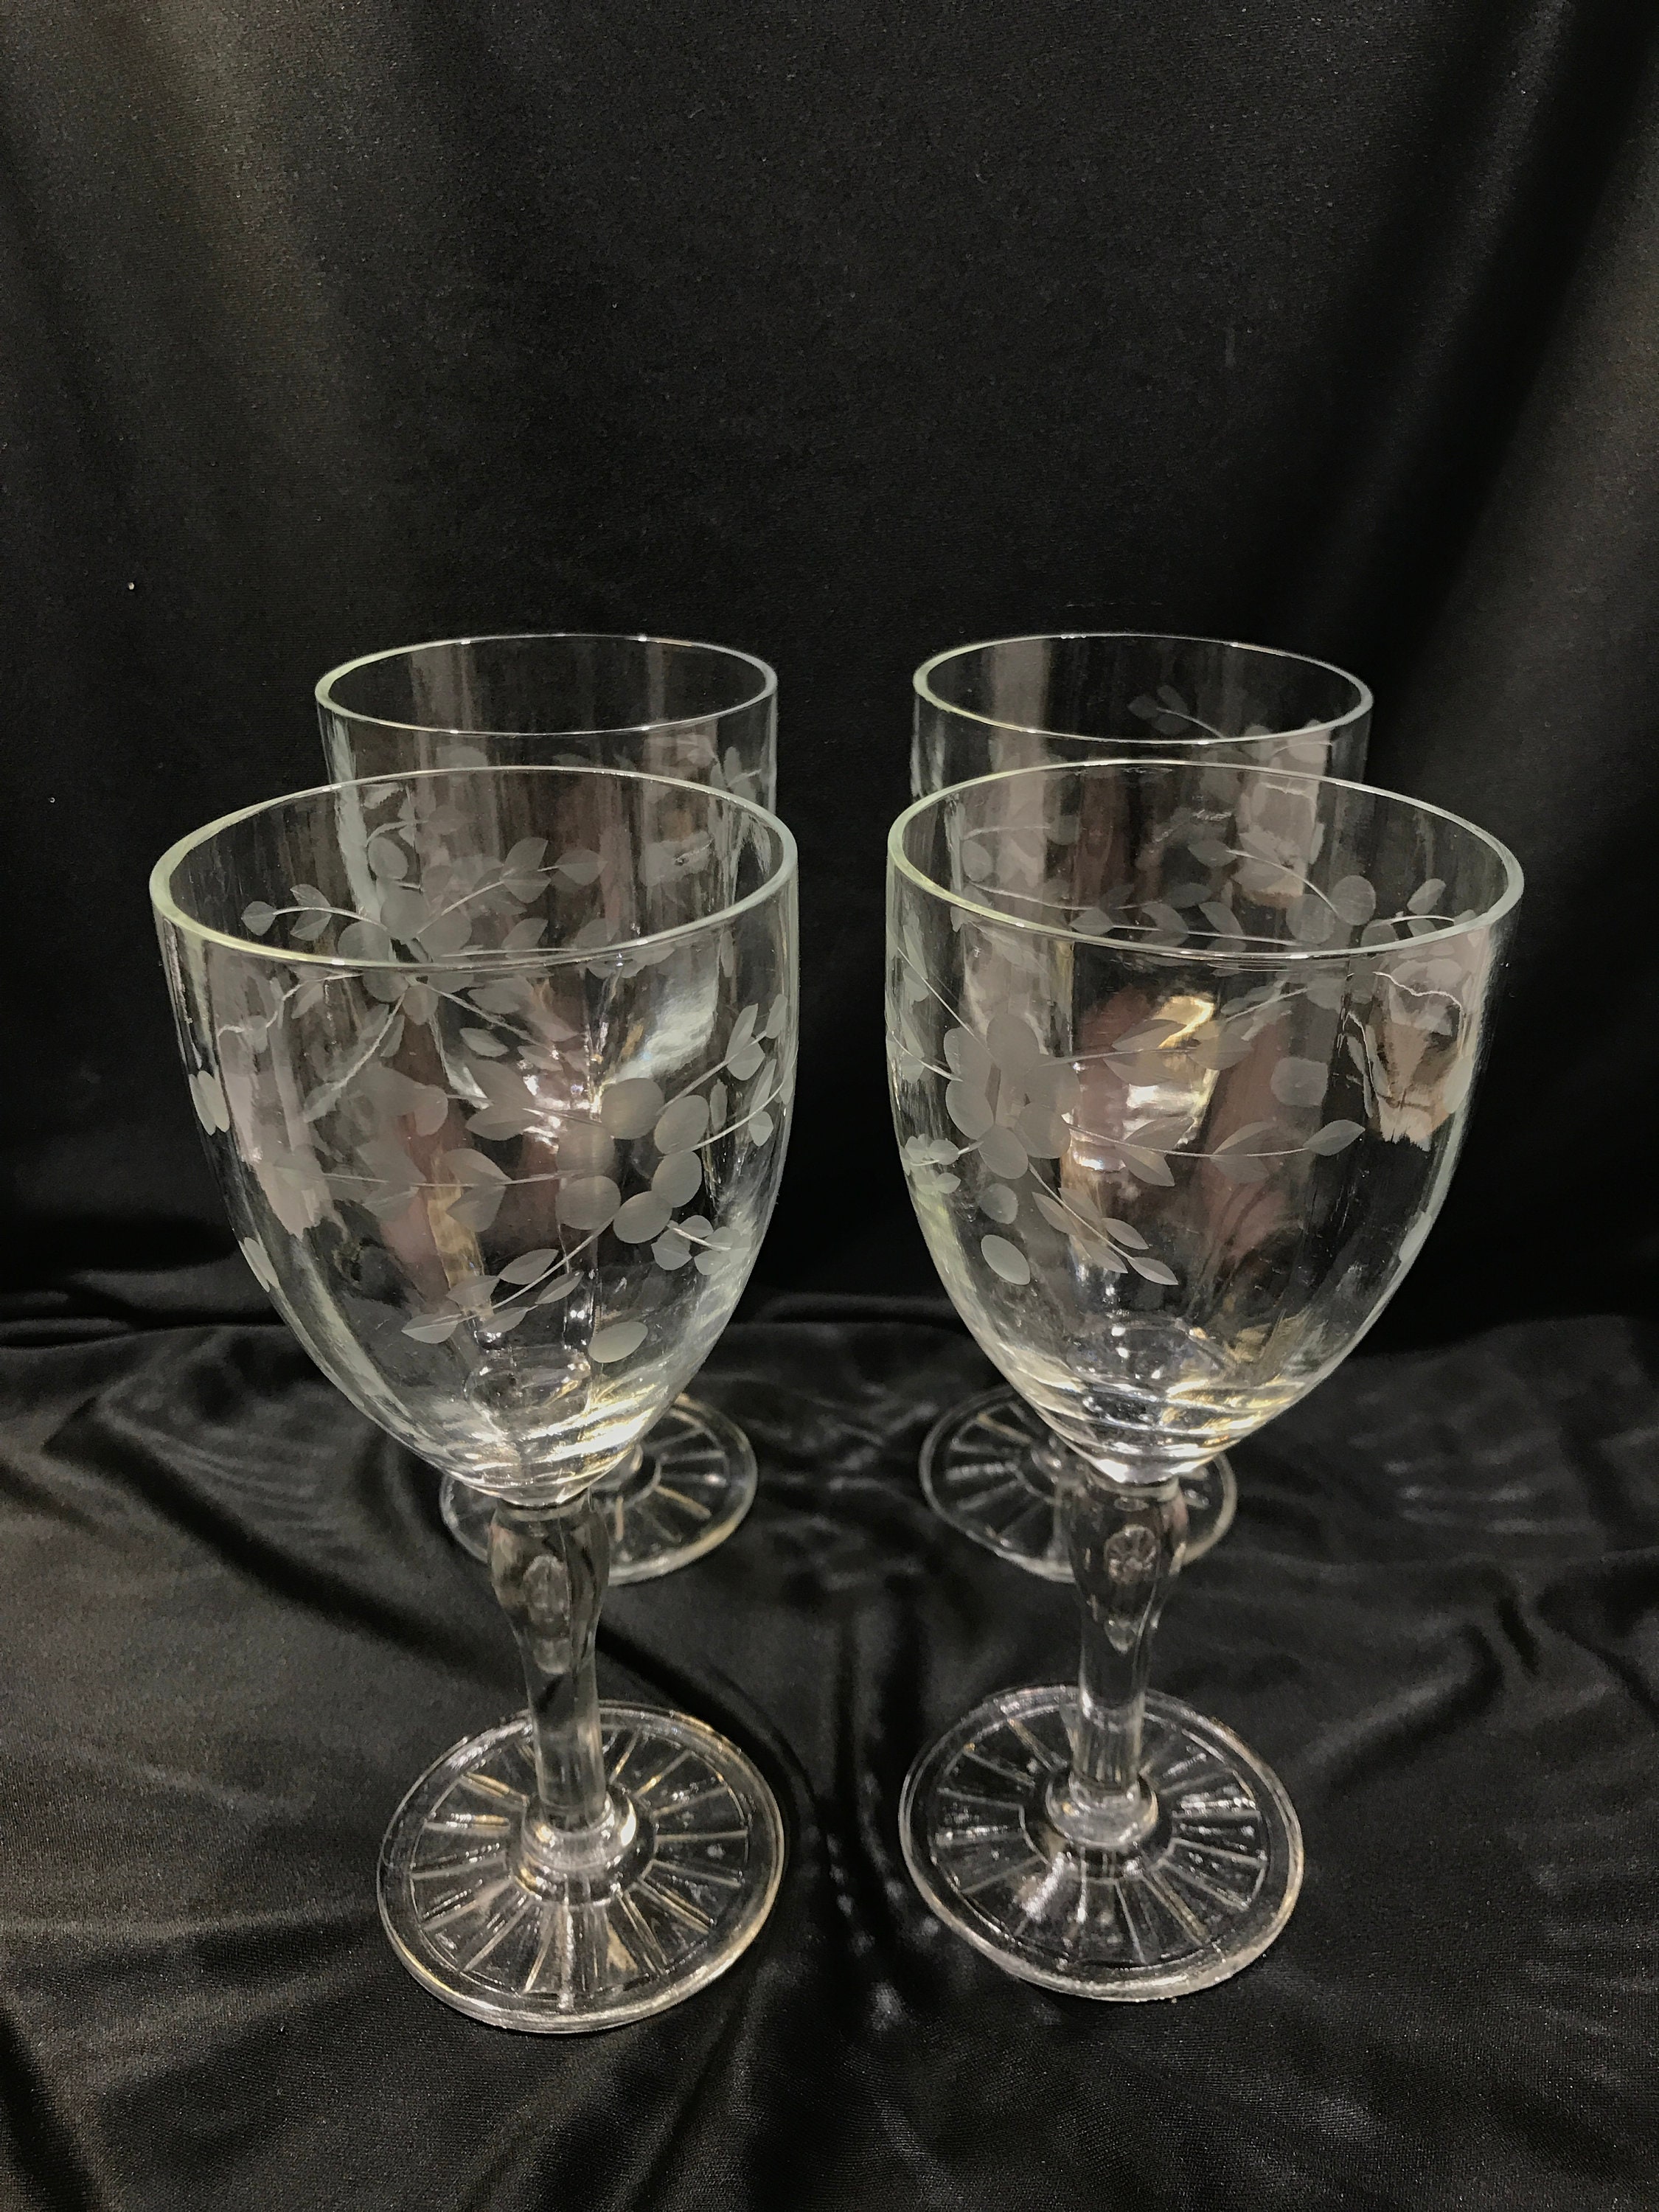 Wine Glass Set, Etched Cut Stemware Lot, Set of 4 Glasses, Etched Clear  Floral Design, Housewarming Gift, Wedding Gift 